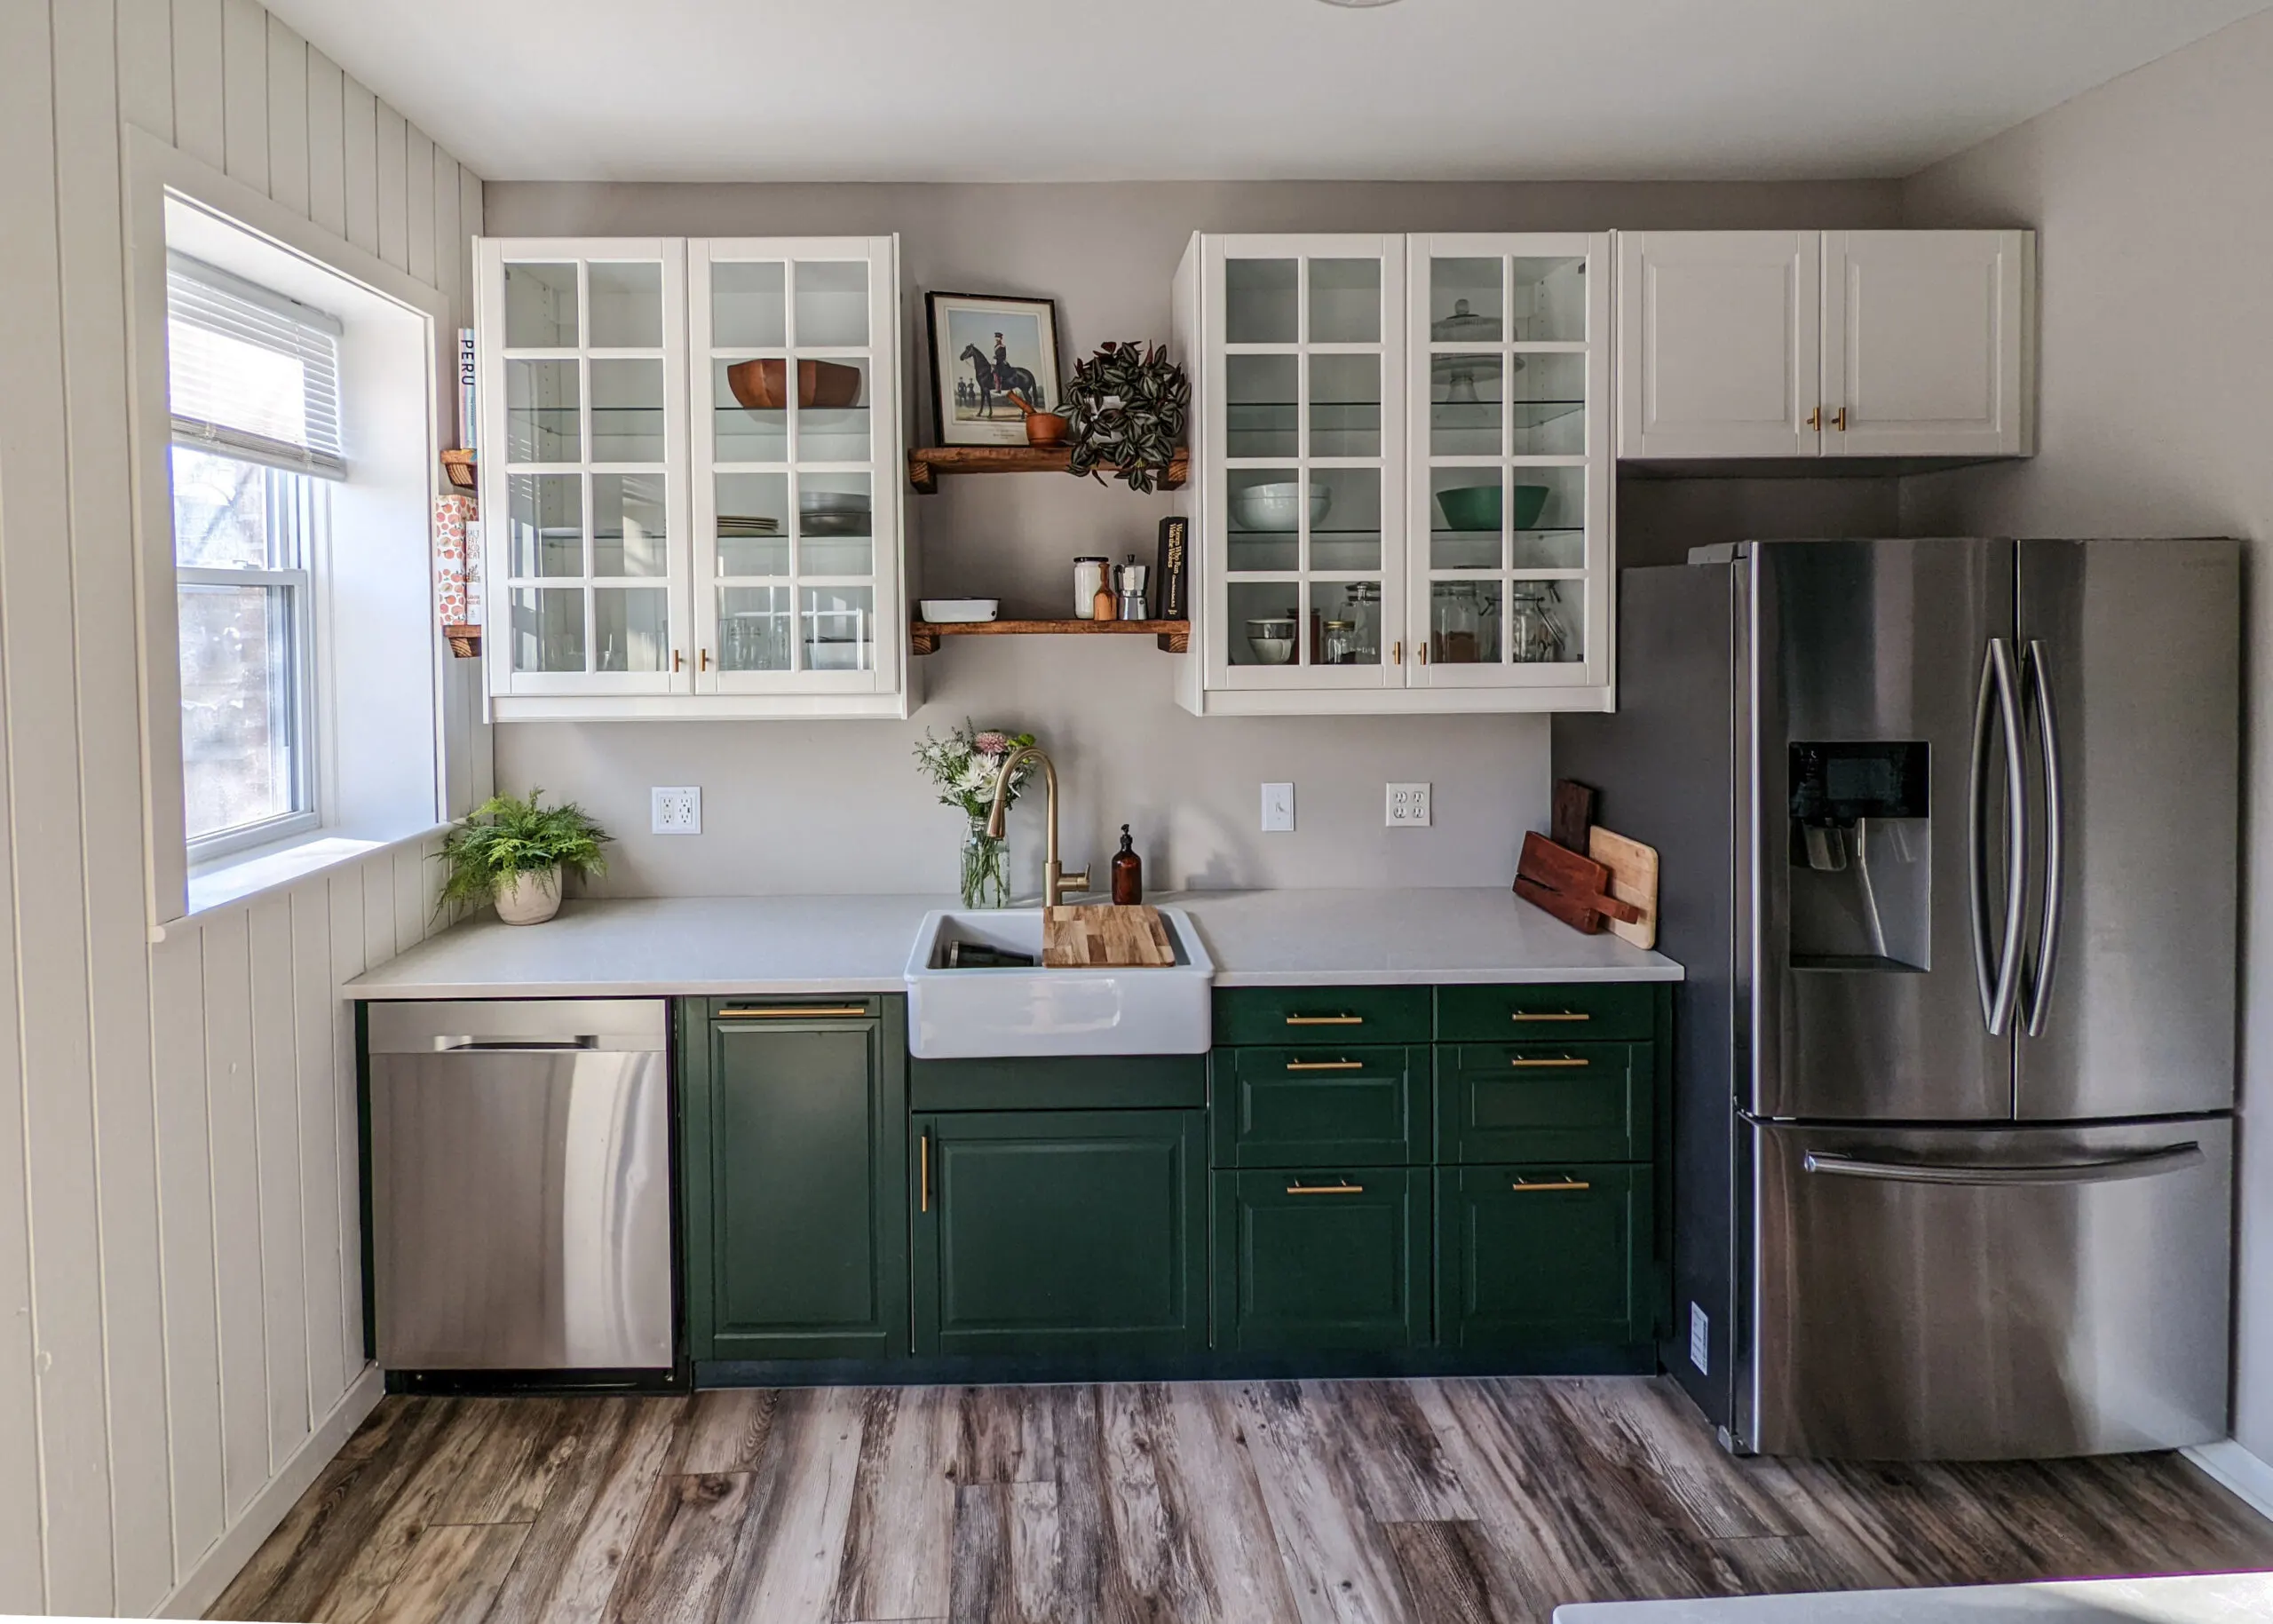 Stainless steel appliances paired with gold fixtures in a kitchen with green and white cabinets.